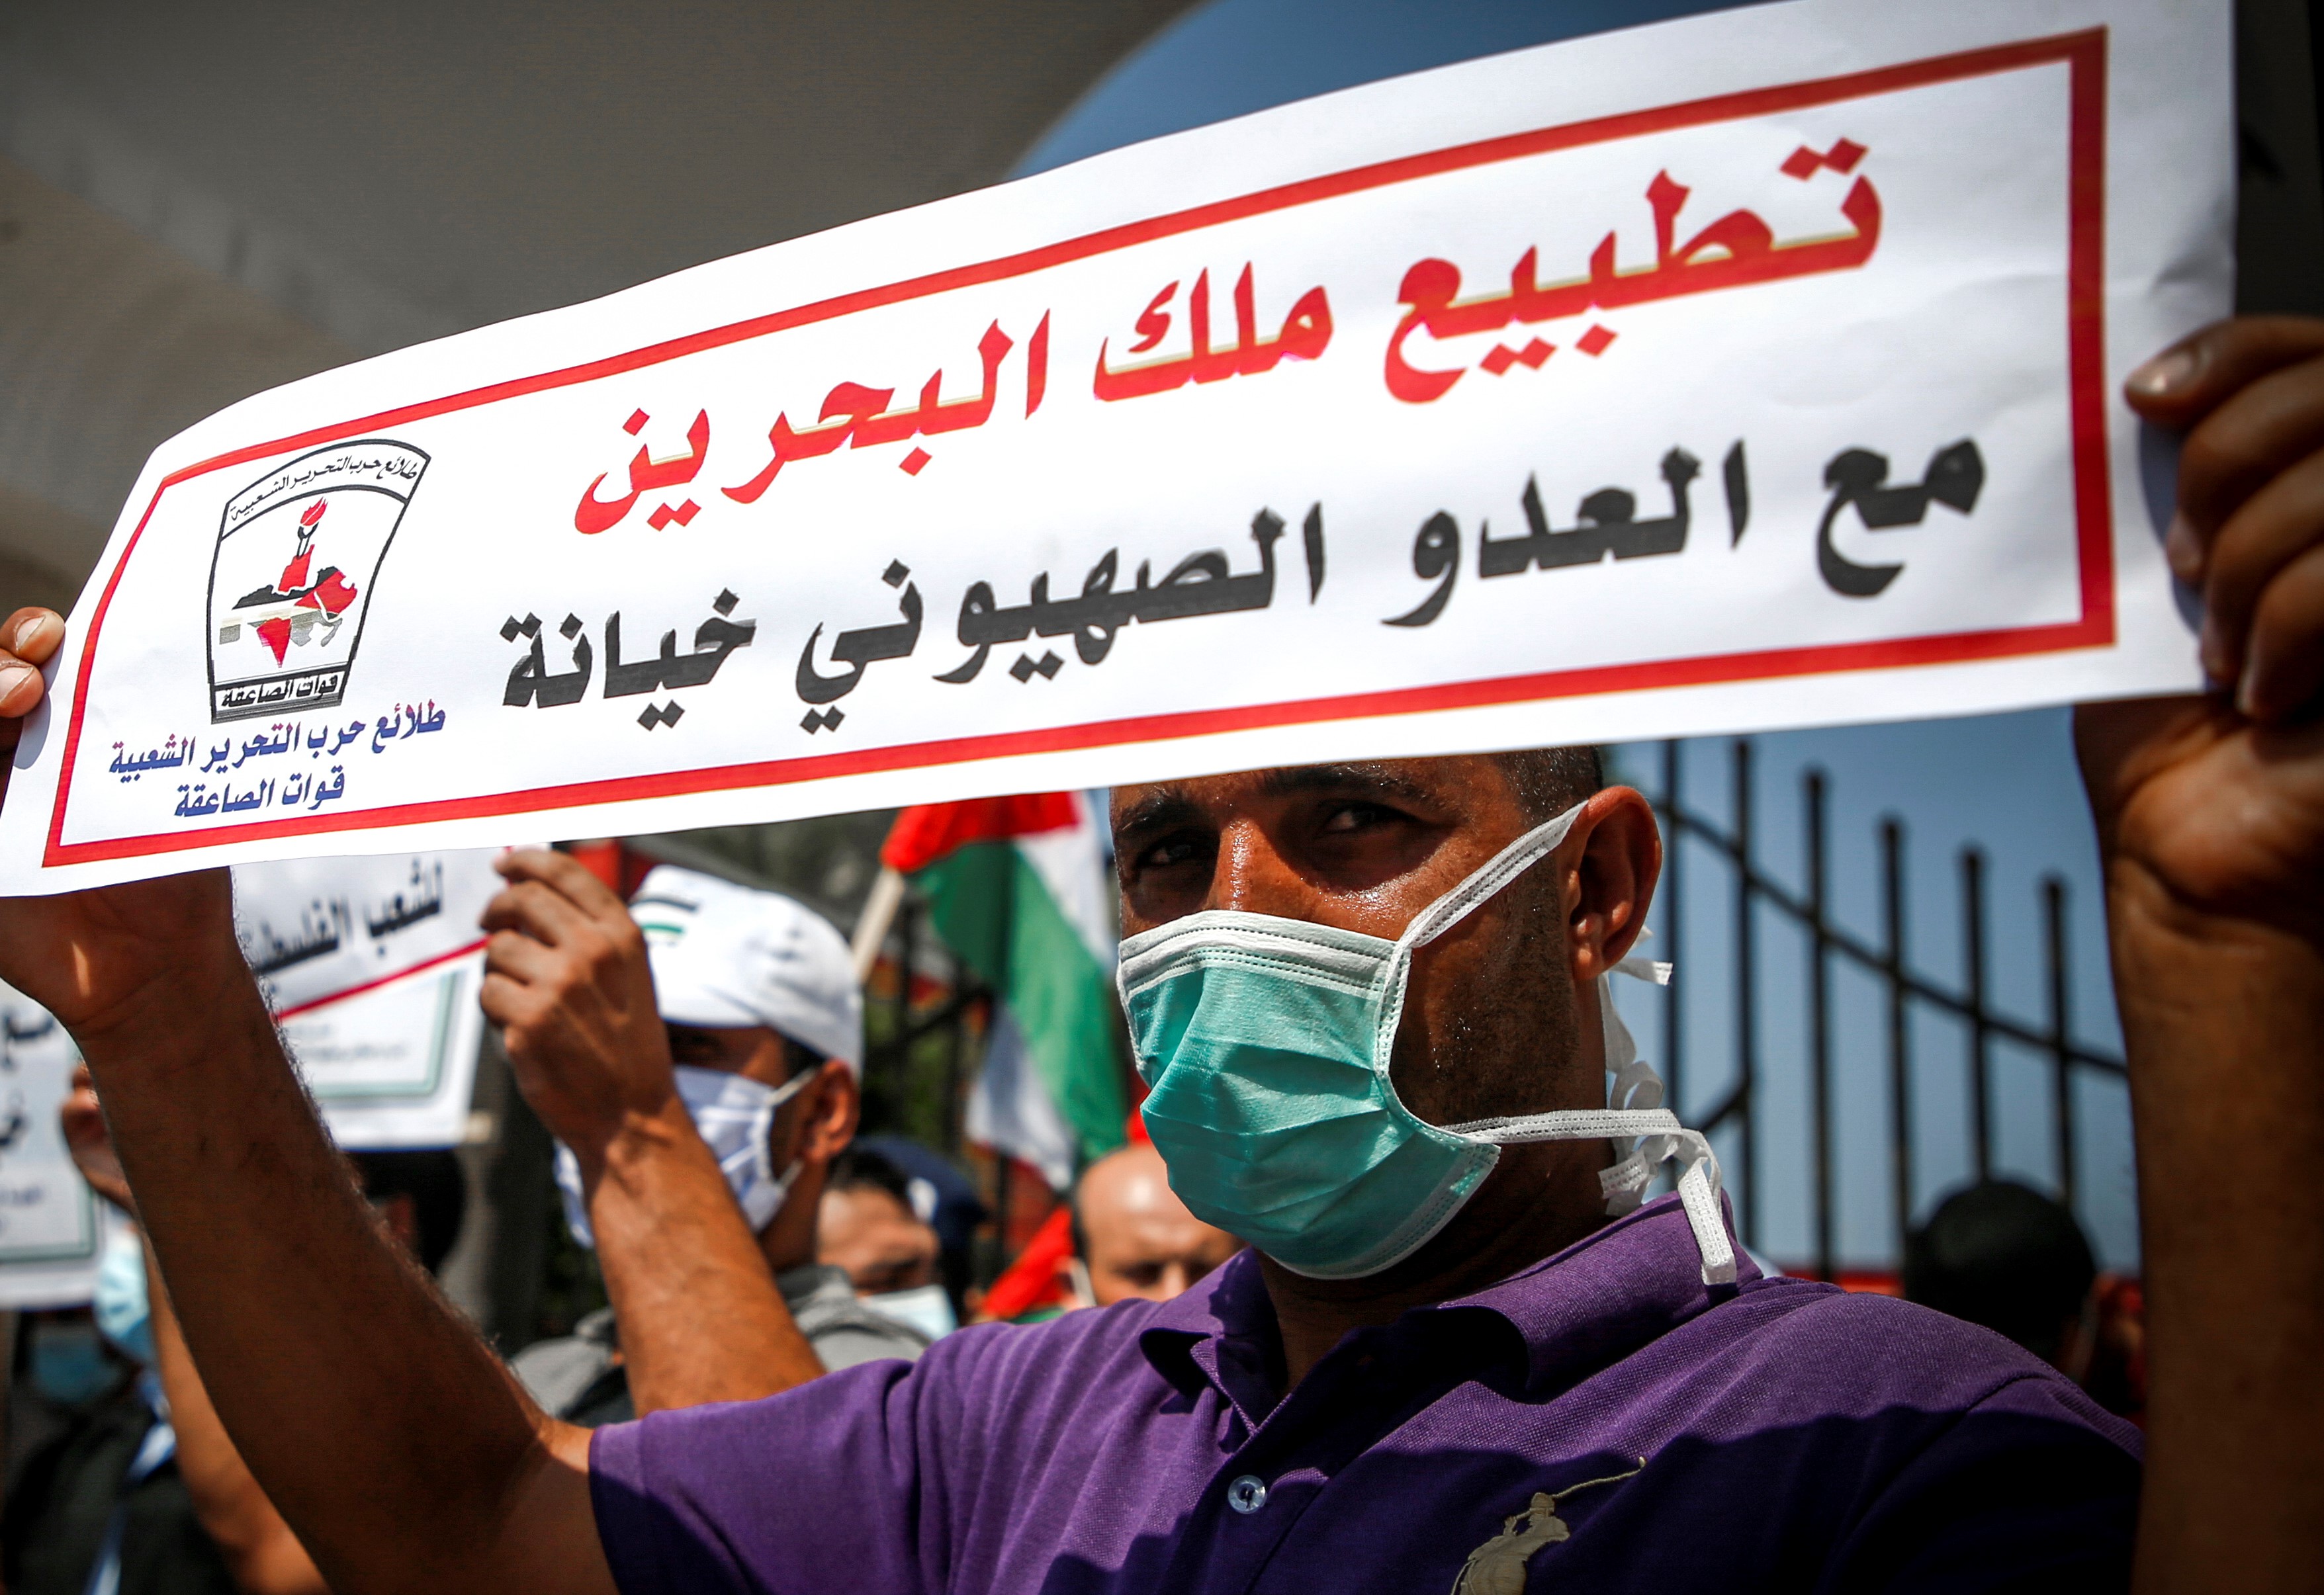 A demonstrator, mask-clad due to the COVID-19 coronavirus pandemic, stands holding a sign reading in Arabic "the King of Bahrain's normalisation with Israel is betrayal" during a protest against the United Arab Emirates' and Bahrain's decisions to normalise relations with Israel, in Gaza City on September 15, 2020.